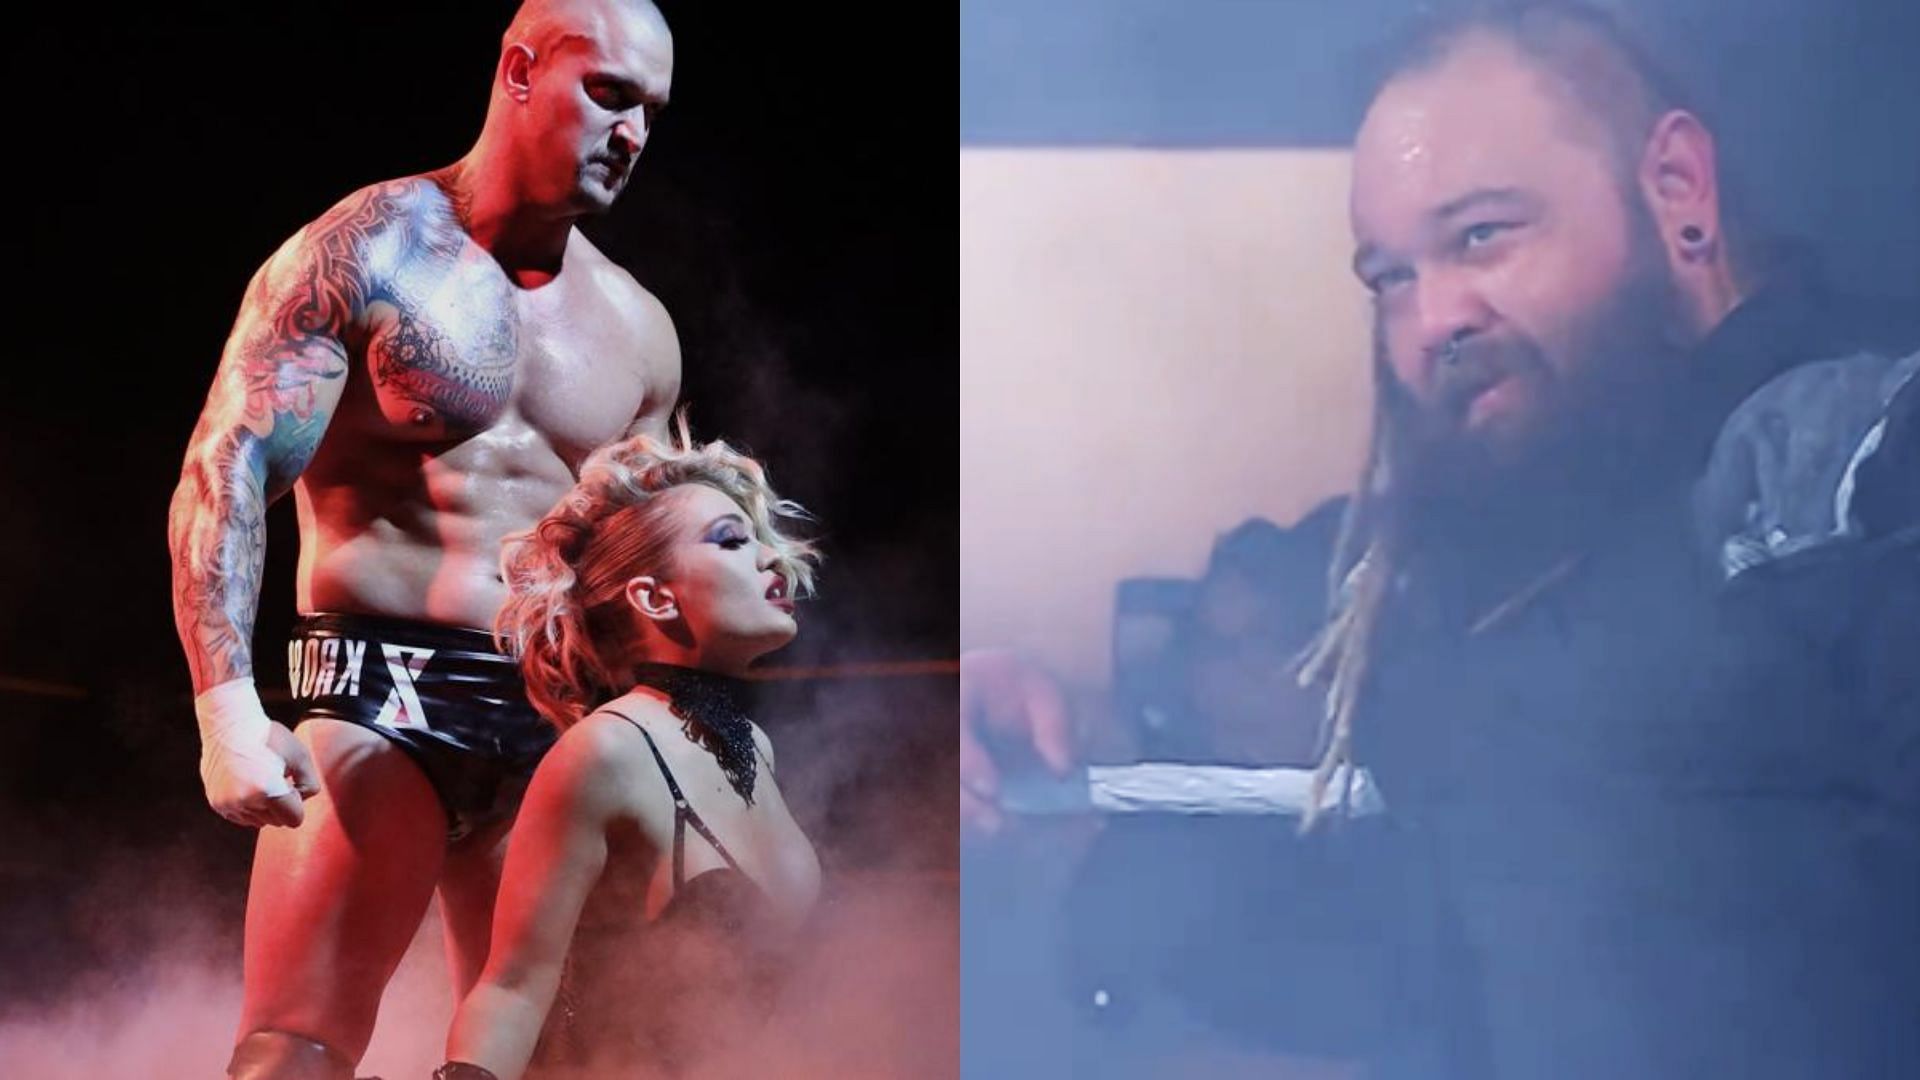 Bray Wyatt and Karrion Kross have a similar outlandish gimmick